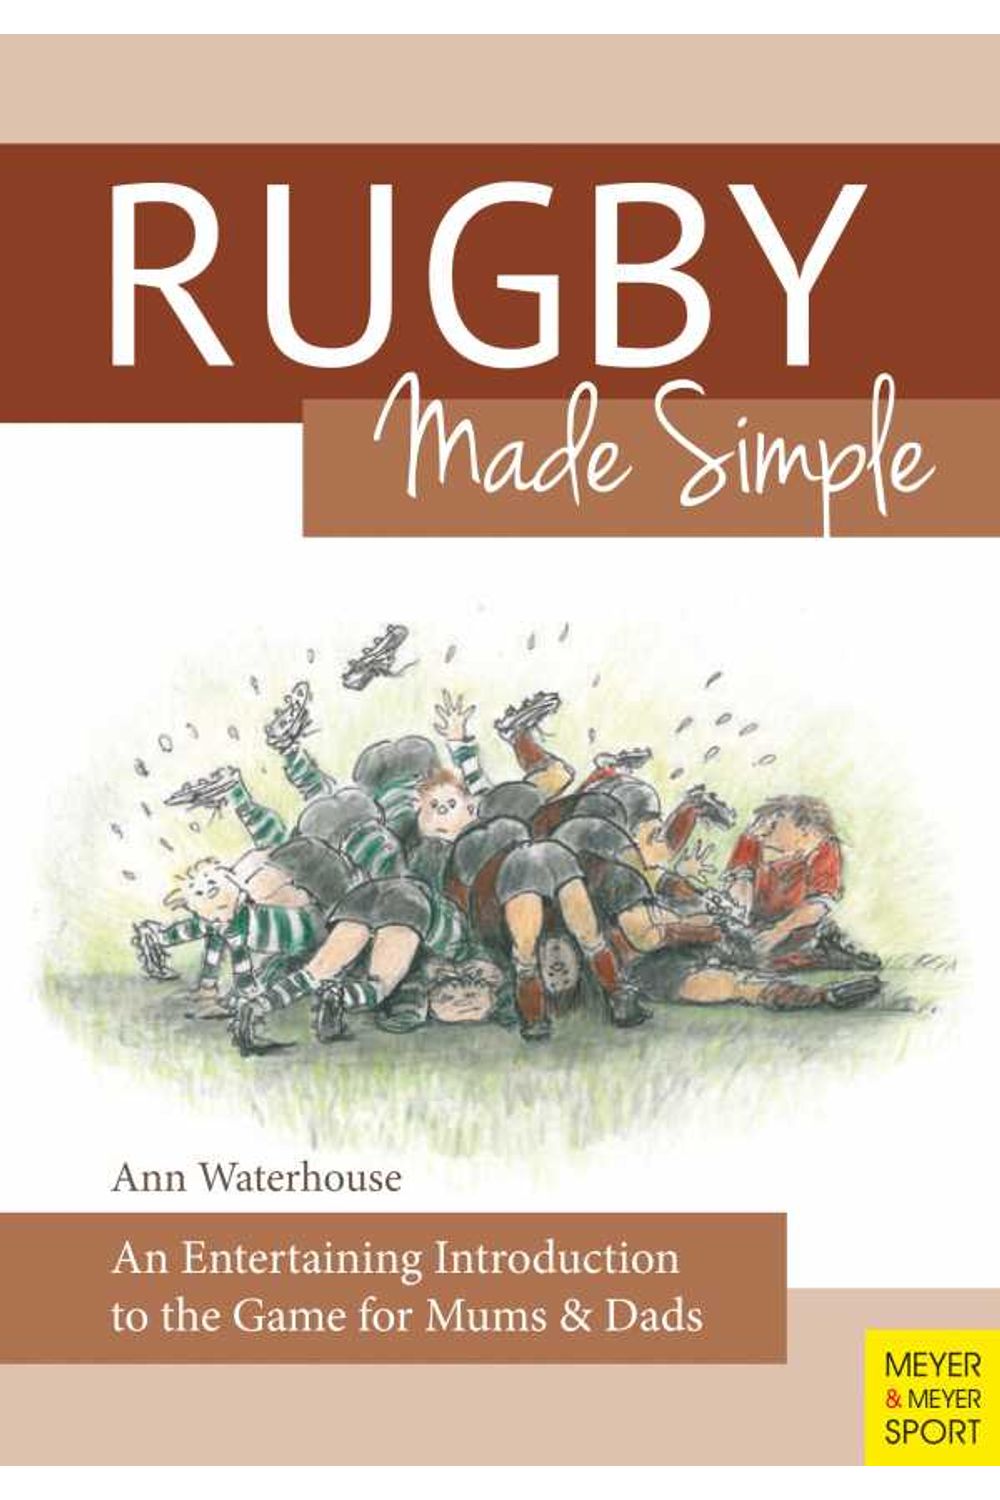 bw-rugby-made-simple-meyer-meyer-sport-9781782553960